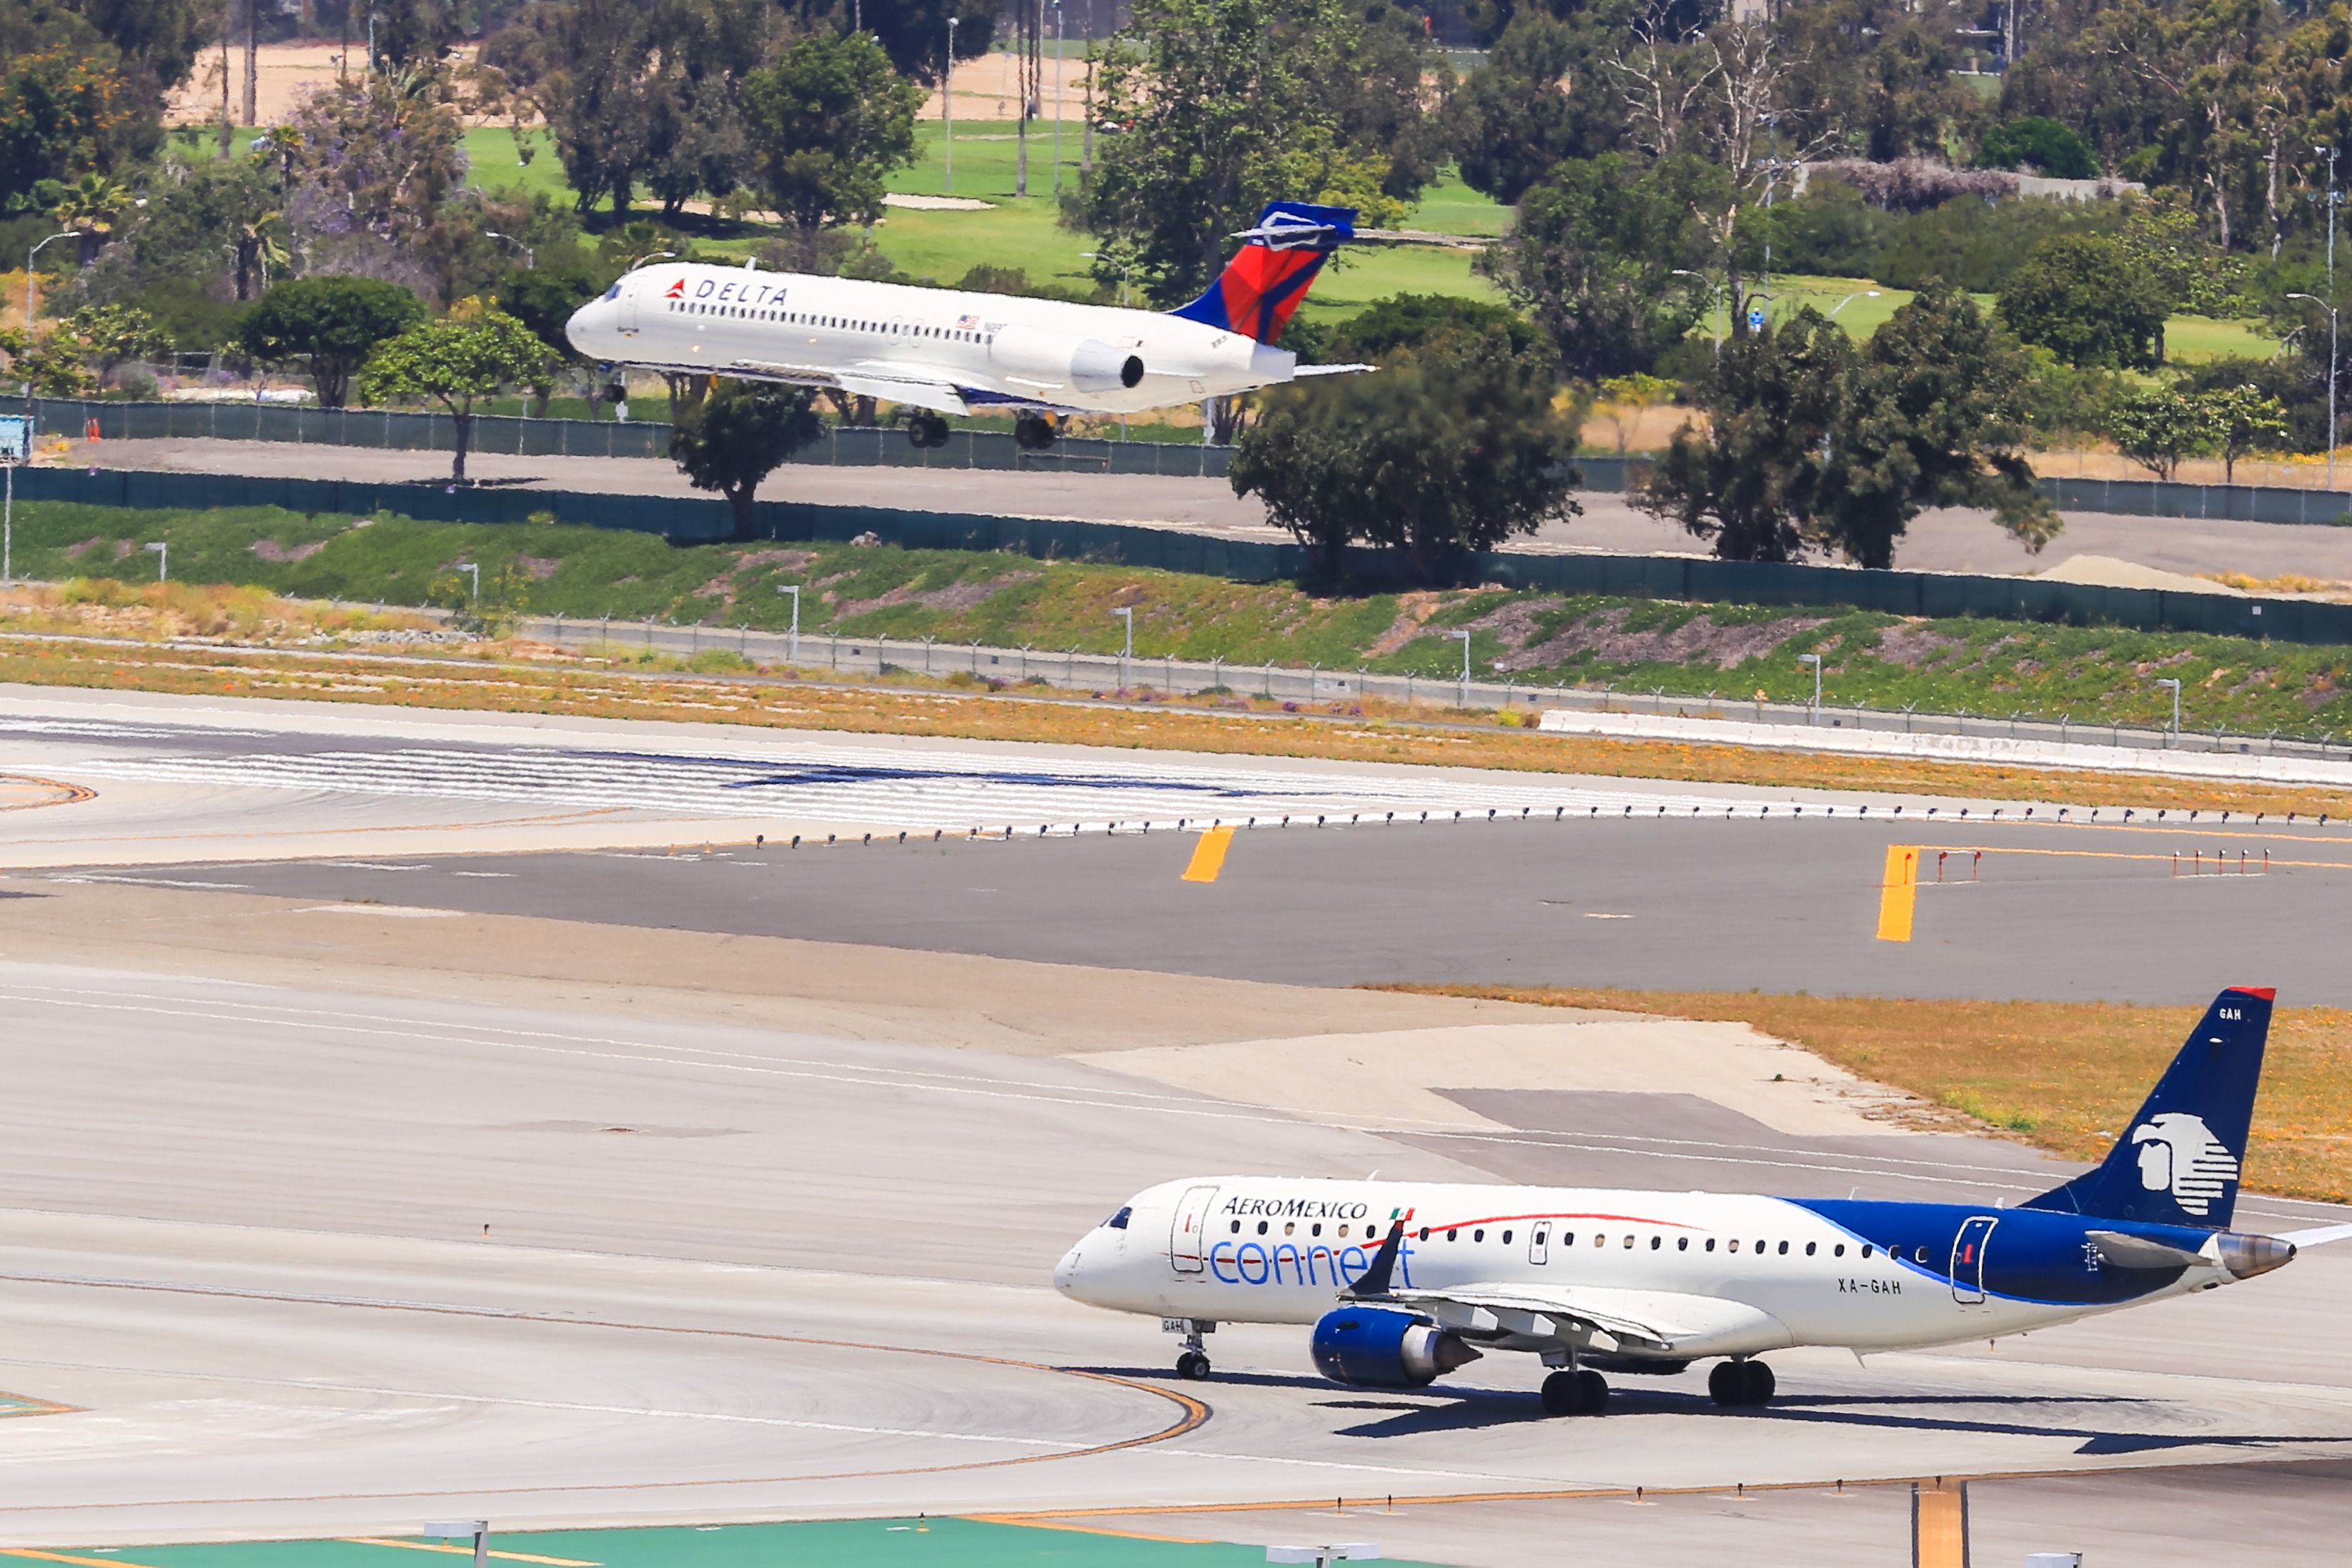 An Aeromexico Connect Embraer E190 and Delta Air Lines Boeing 717-200 at Los Angeles International Airport.